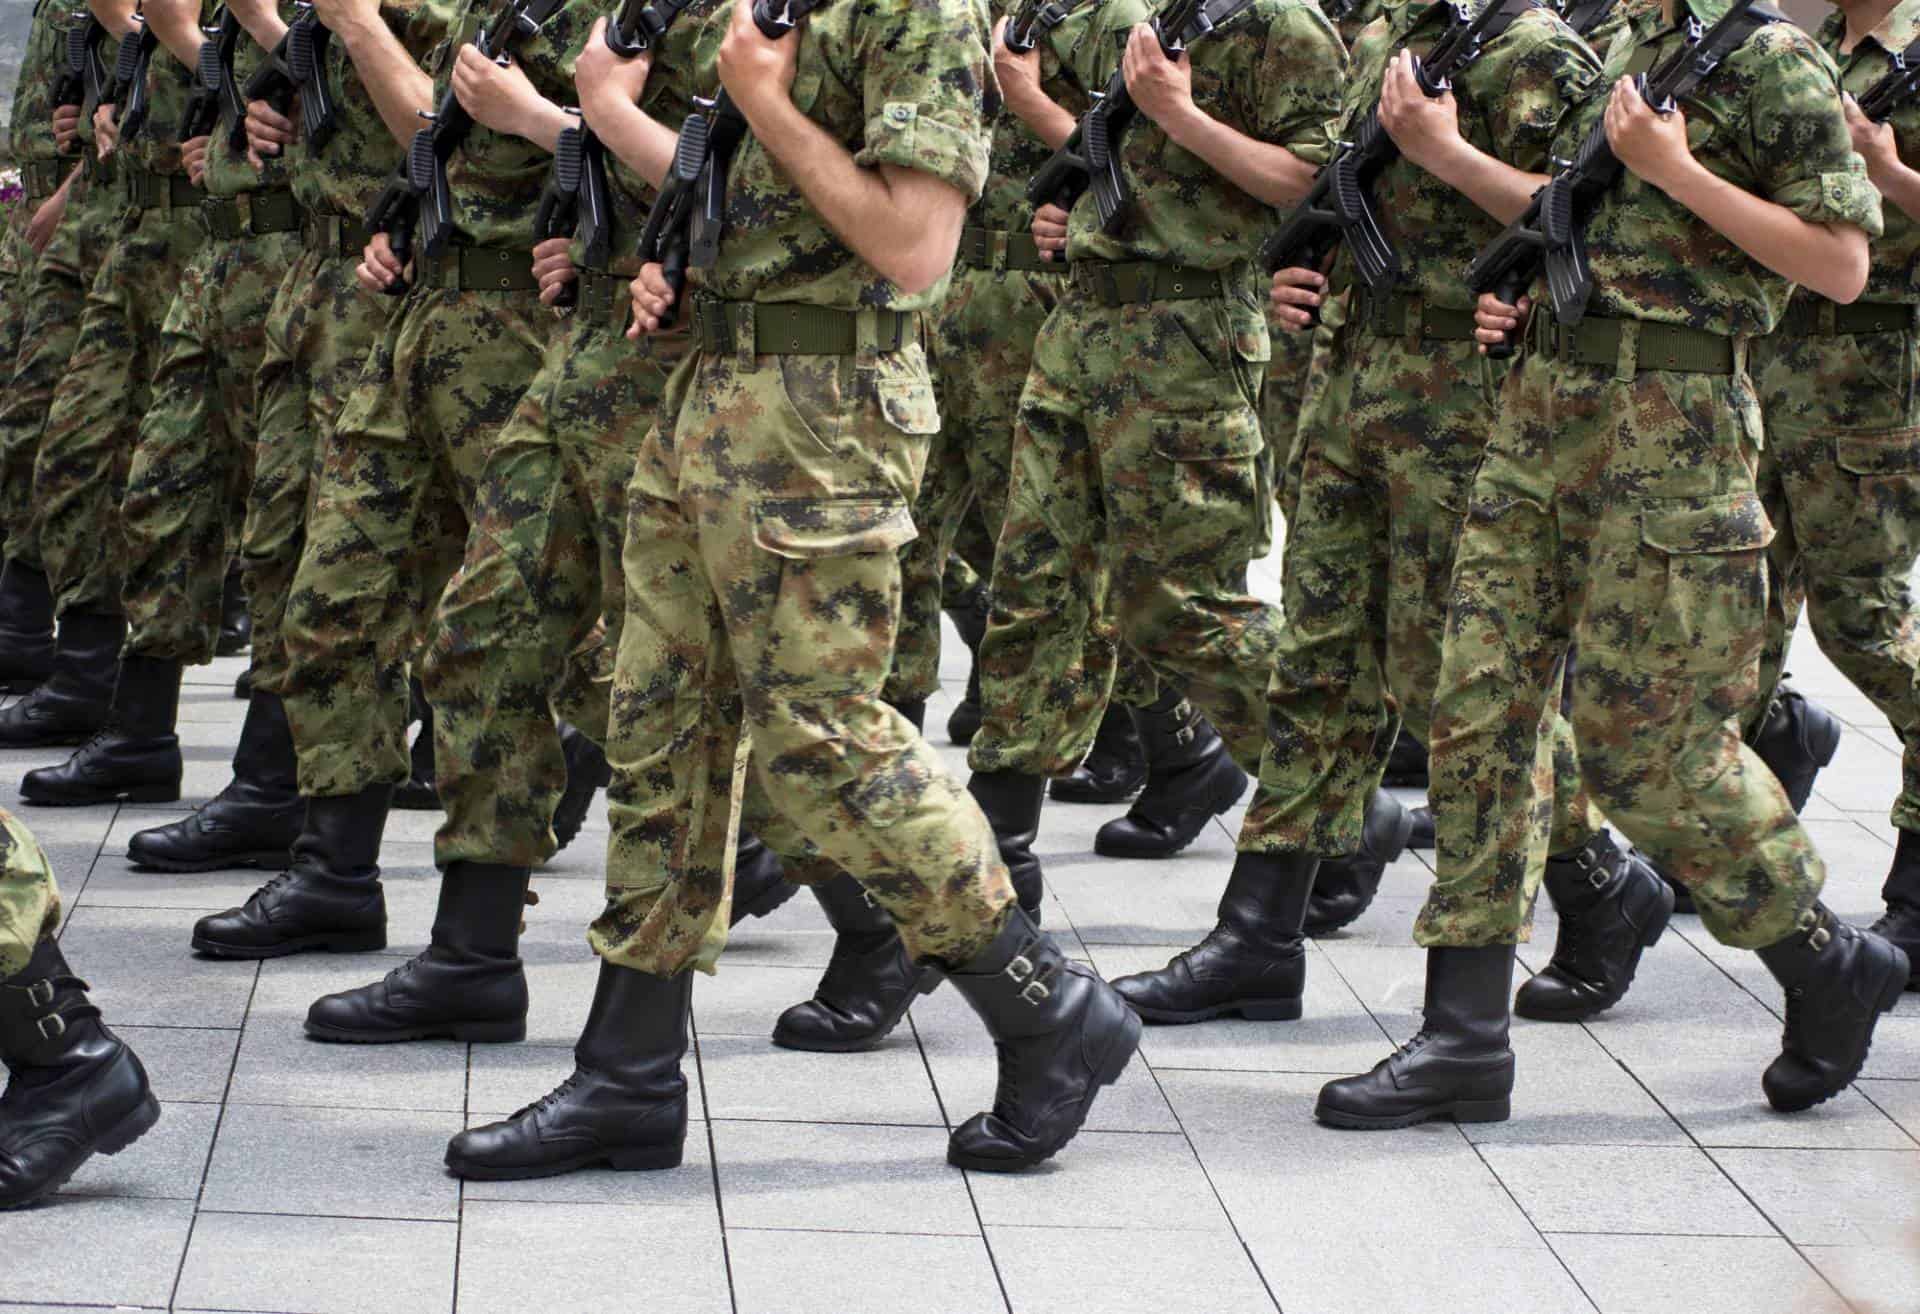 What countries still have mandatory conscription for military service?